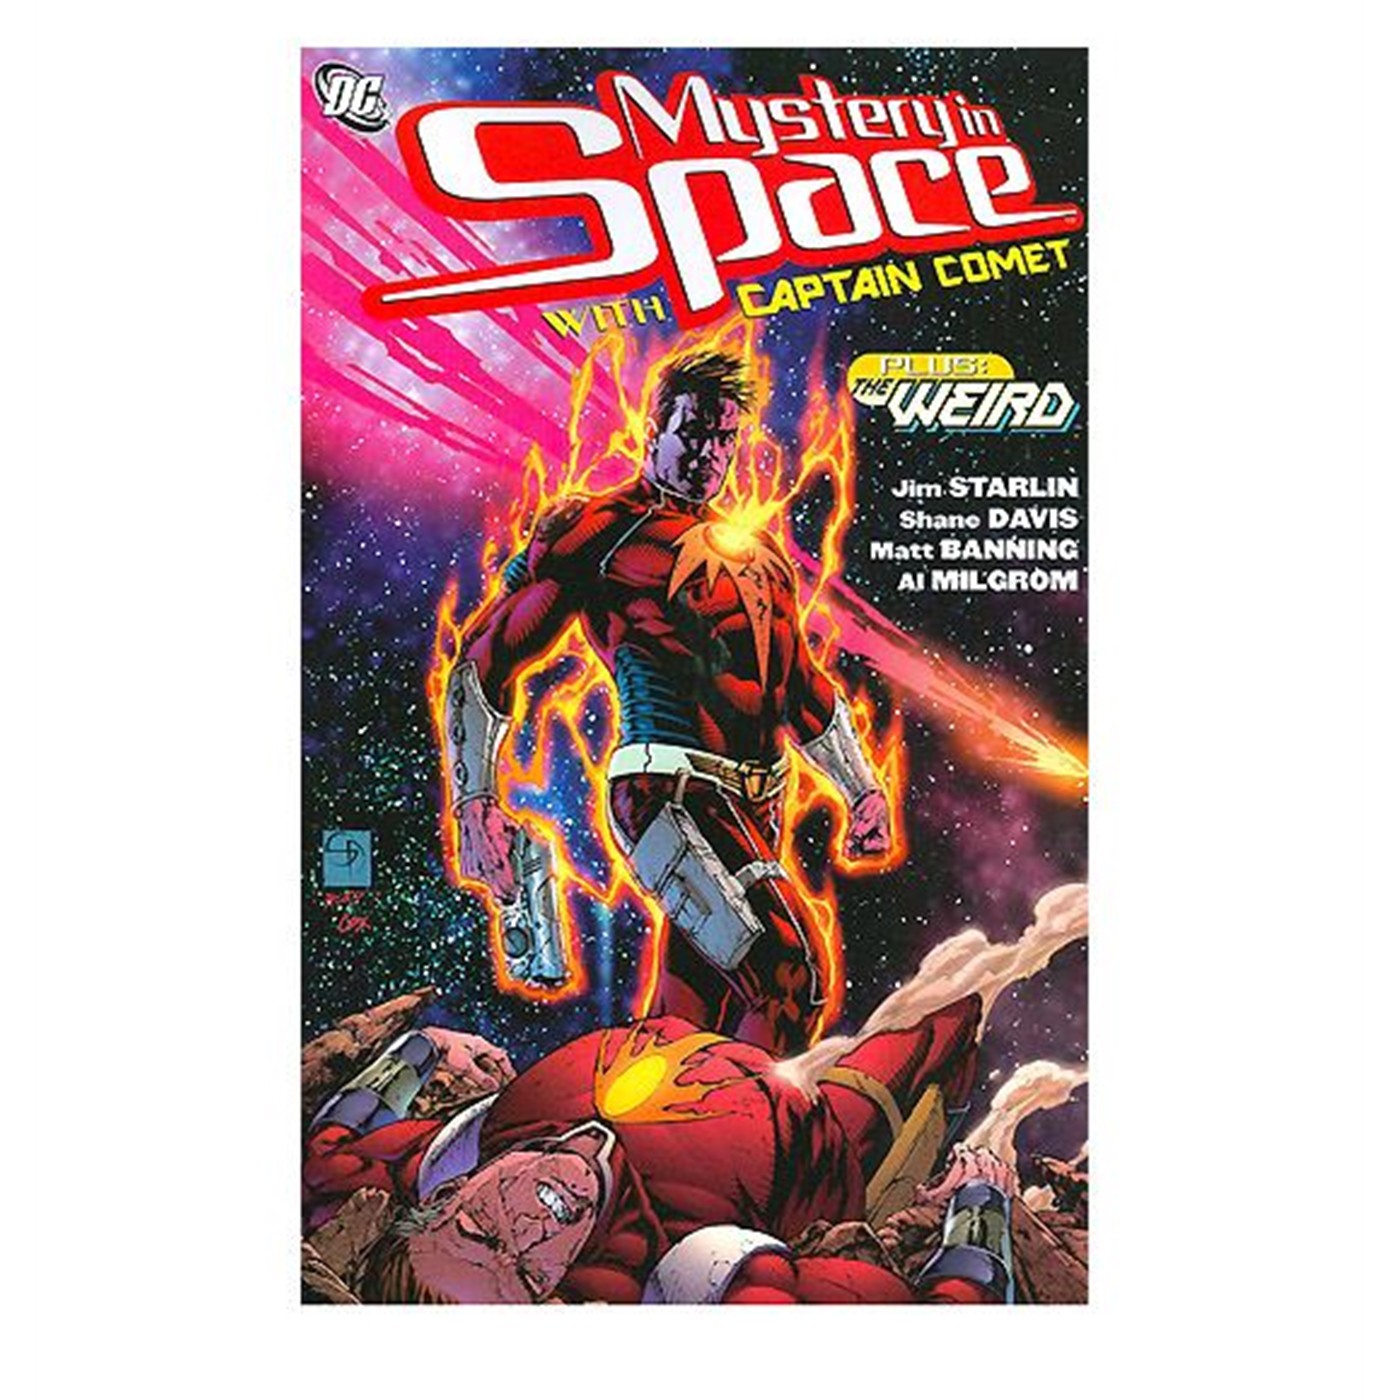 Mystery in Space with Captain Comet Vol 1 TP